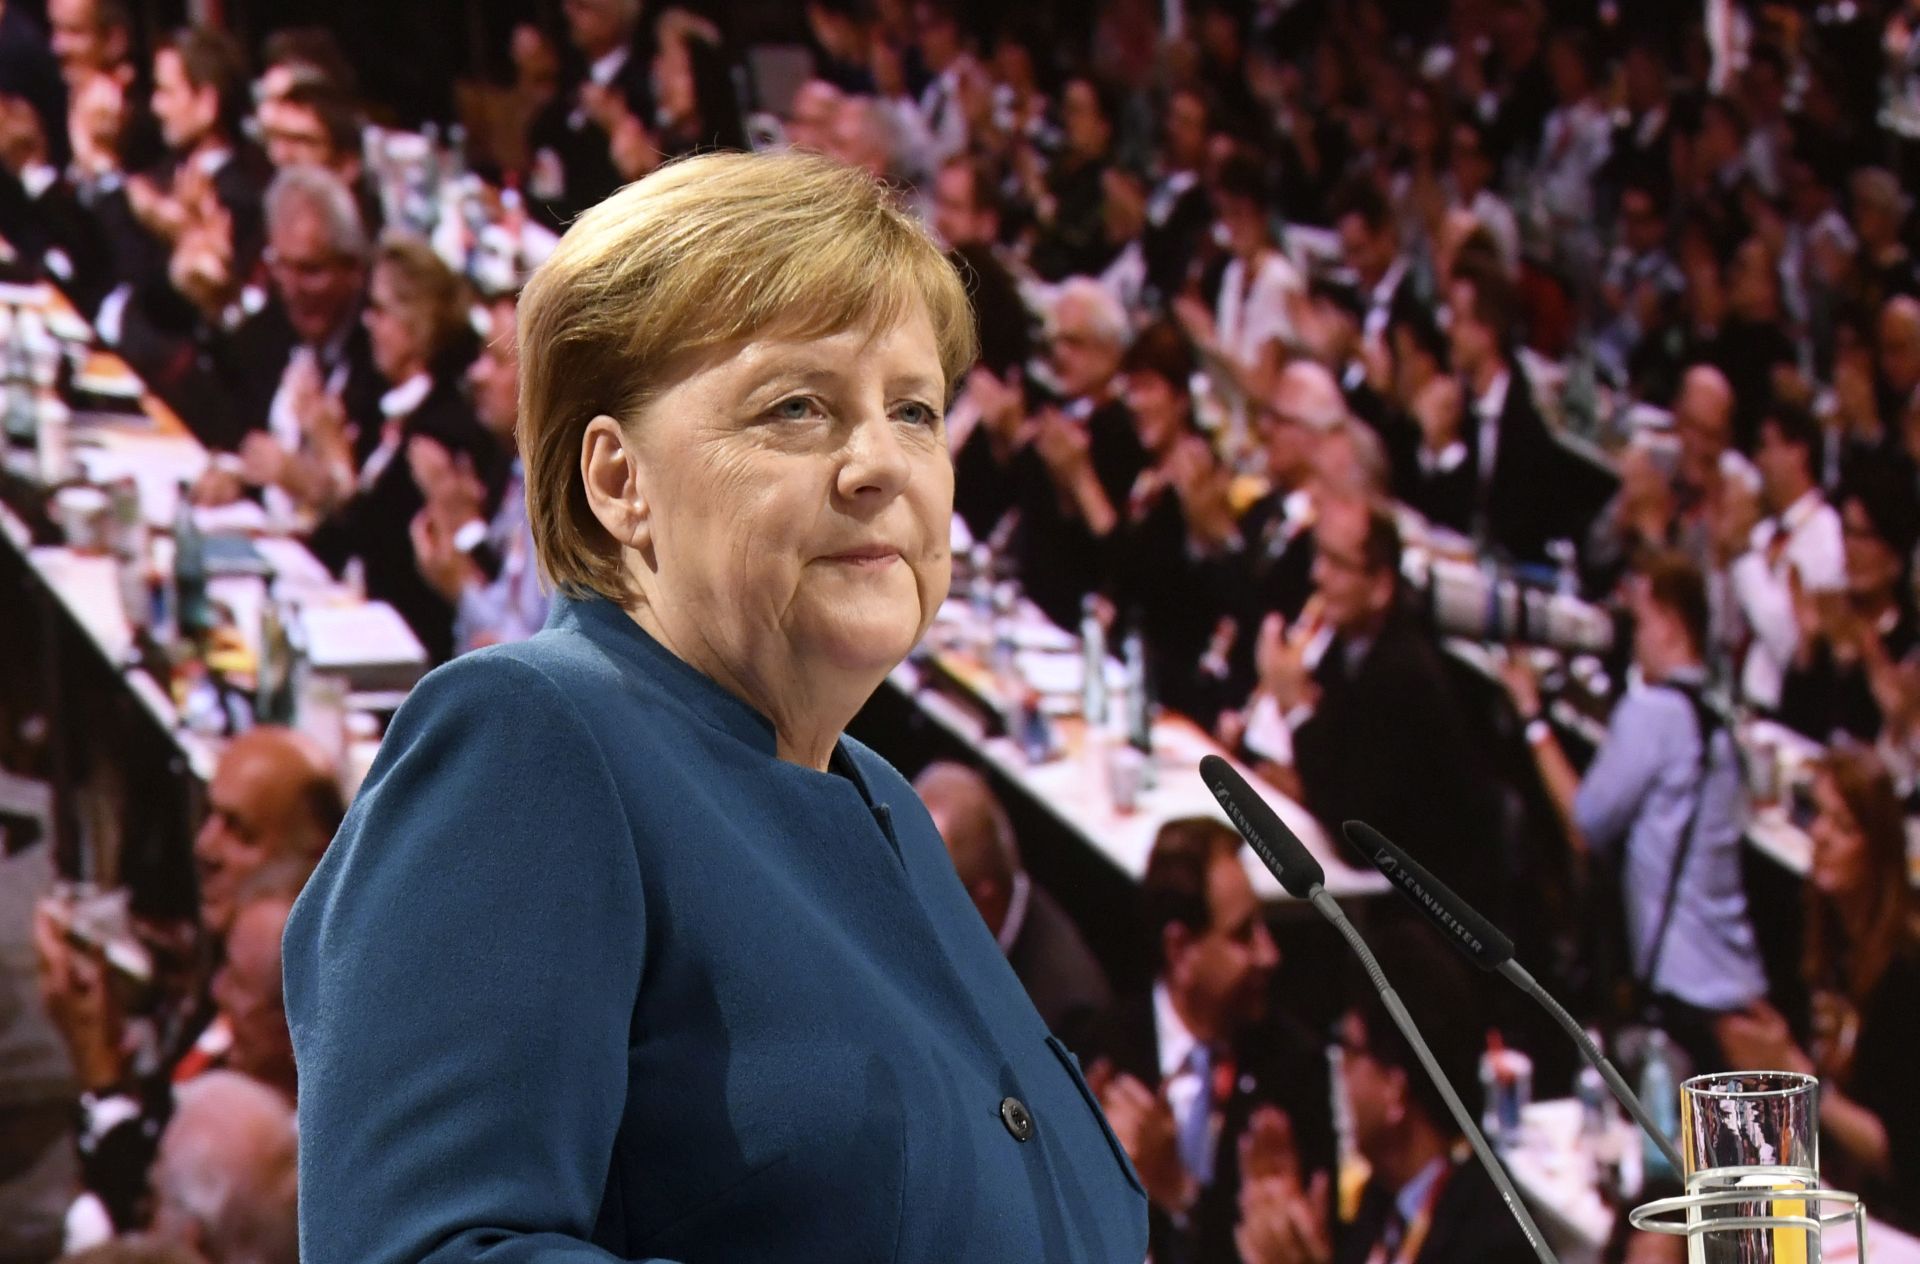 epa07214332 German Chancellor Angela Merkel receives applause from the delegates during the 31st Party Congress of the Christian Democratic Union (CDU) in Hamburg, Germany, 07 December 2018. At the party congress, a new party leader is to be elected. Associated with the new party leader is the debate over the fundamental political orientation of the CDU after Chancellor Merkel will no longer hold this office.  EPA/CLEMENS BILAN